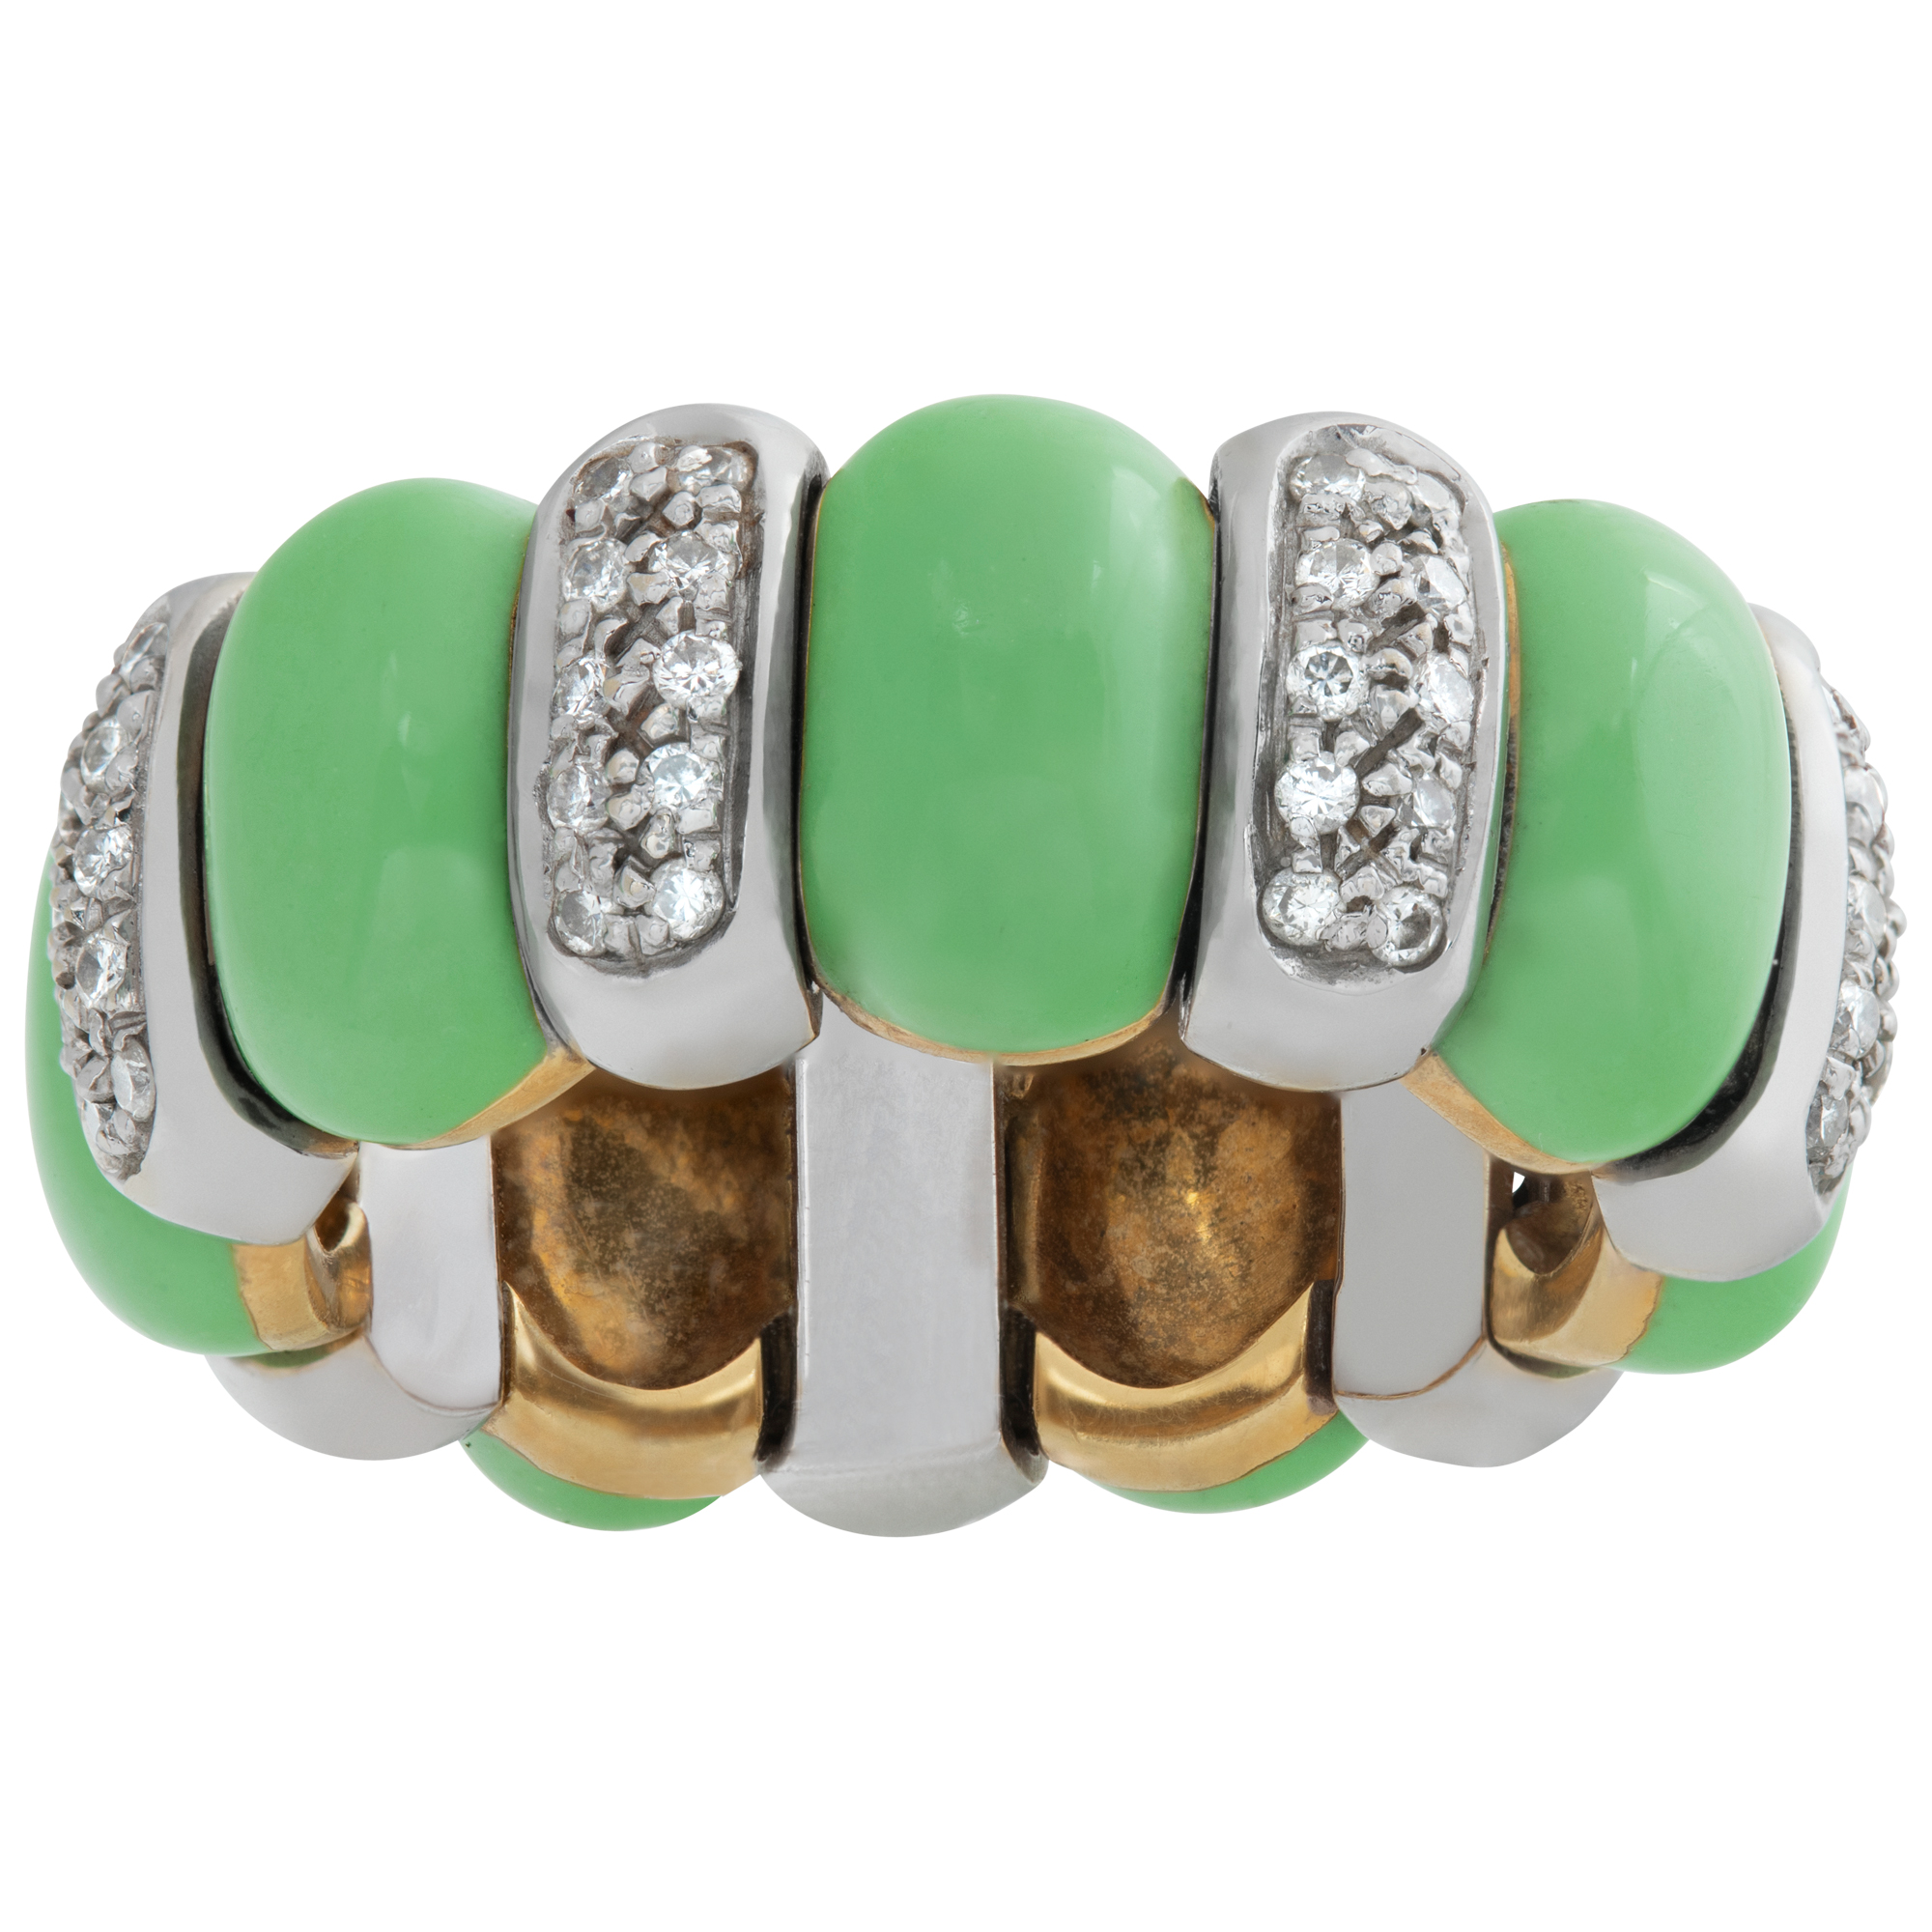 Designer signed "Valent" flexible eternity band with diamonds and cabochon green turquoise set in 18K white & yellow gold.